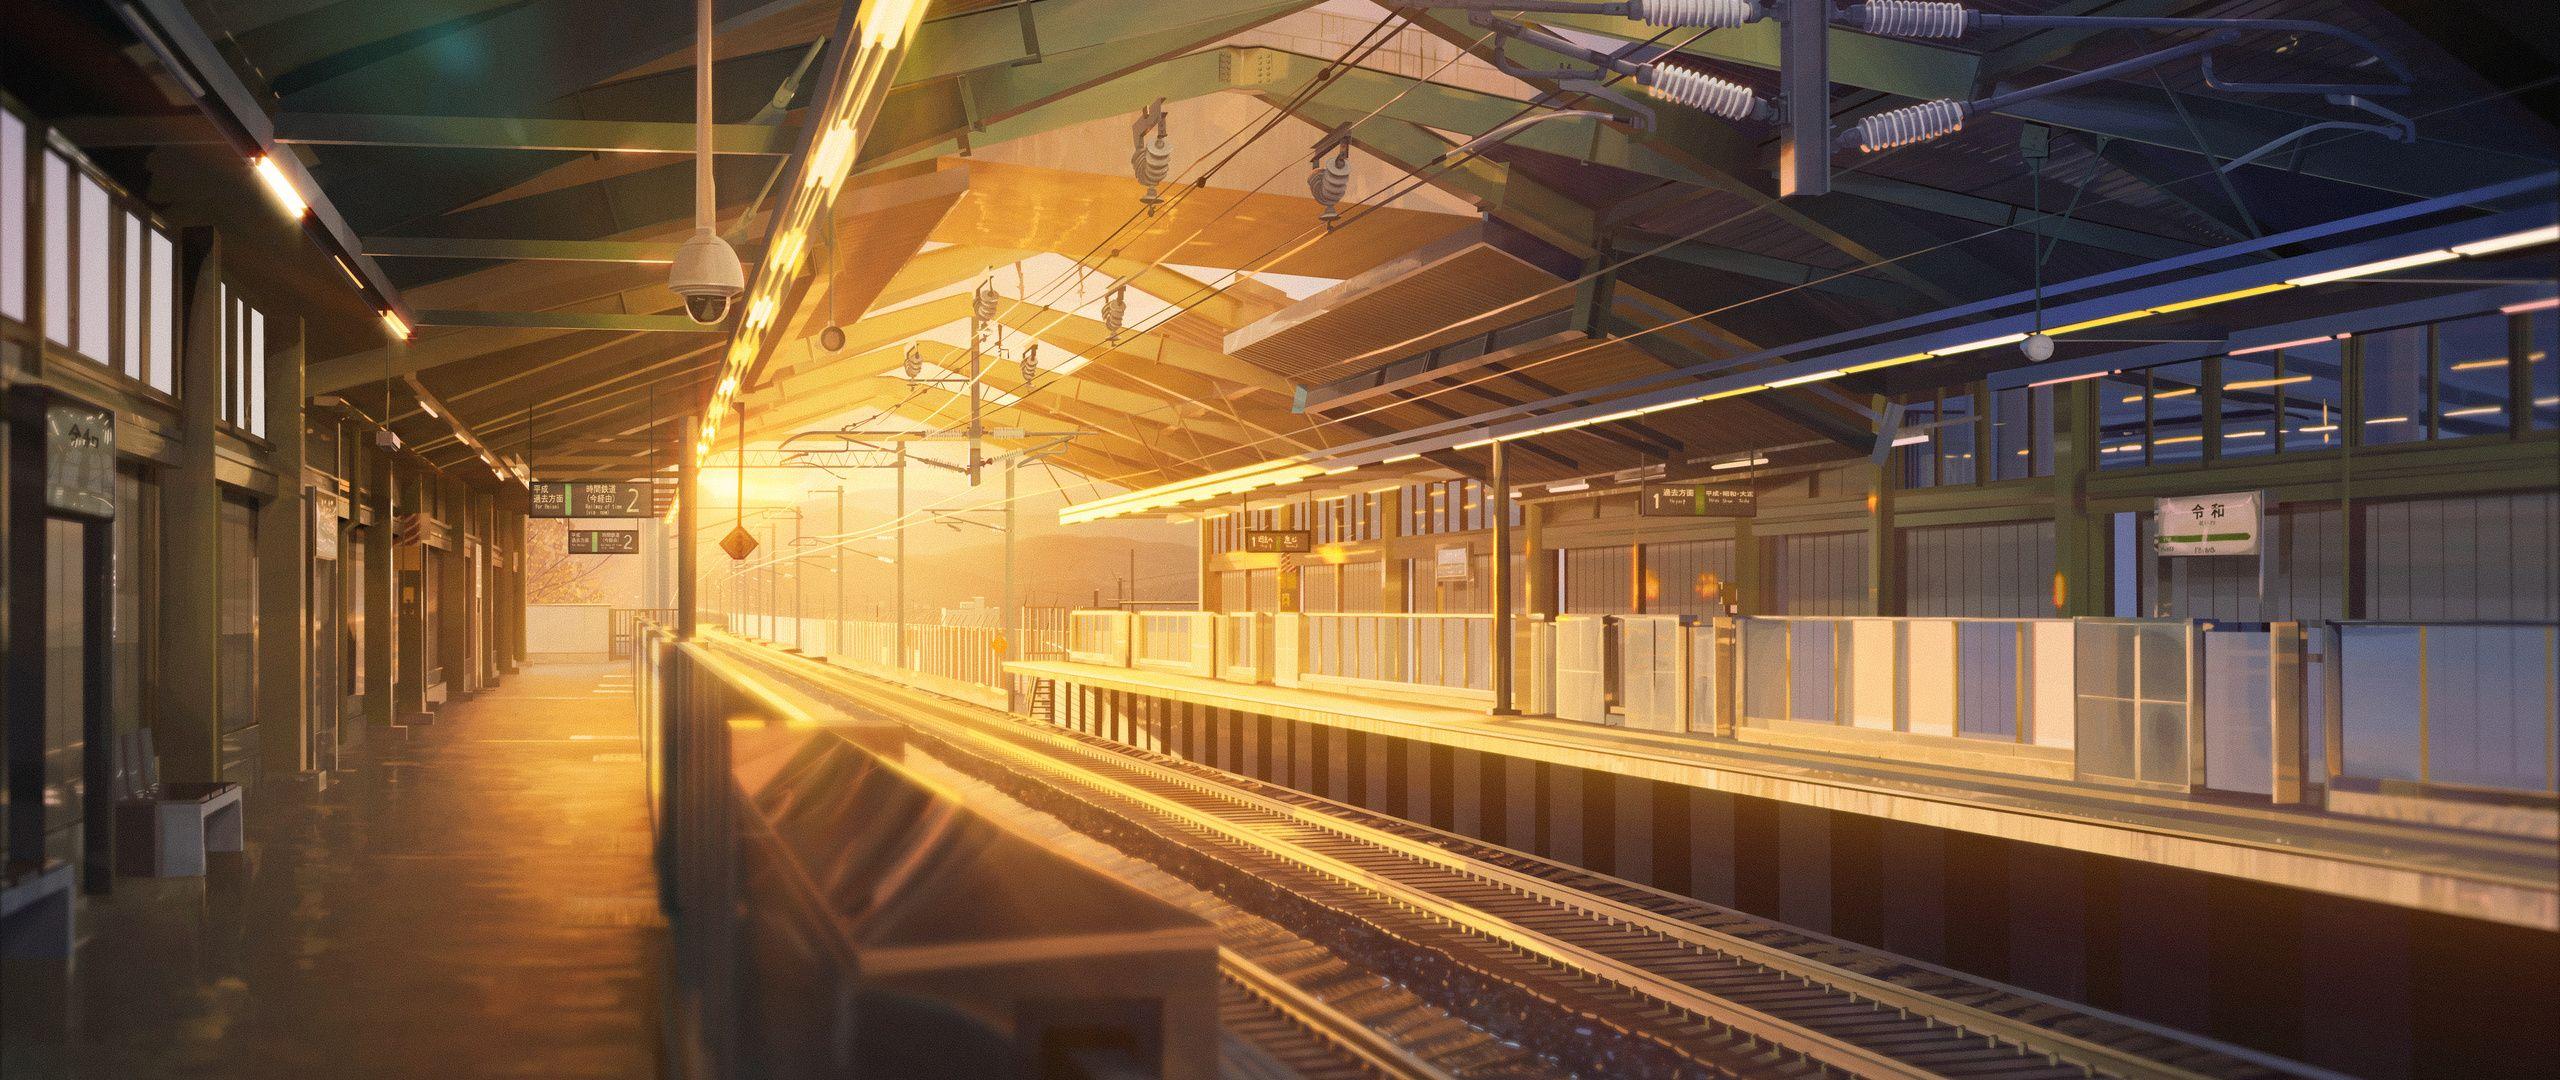 Anime Train Wallpapers Top Free Anime Train Backgrounds Wallpaperaccess Most scene were paint over photos in photoshop. anime train wallpapers top free anime